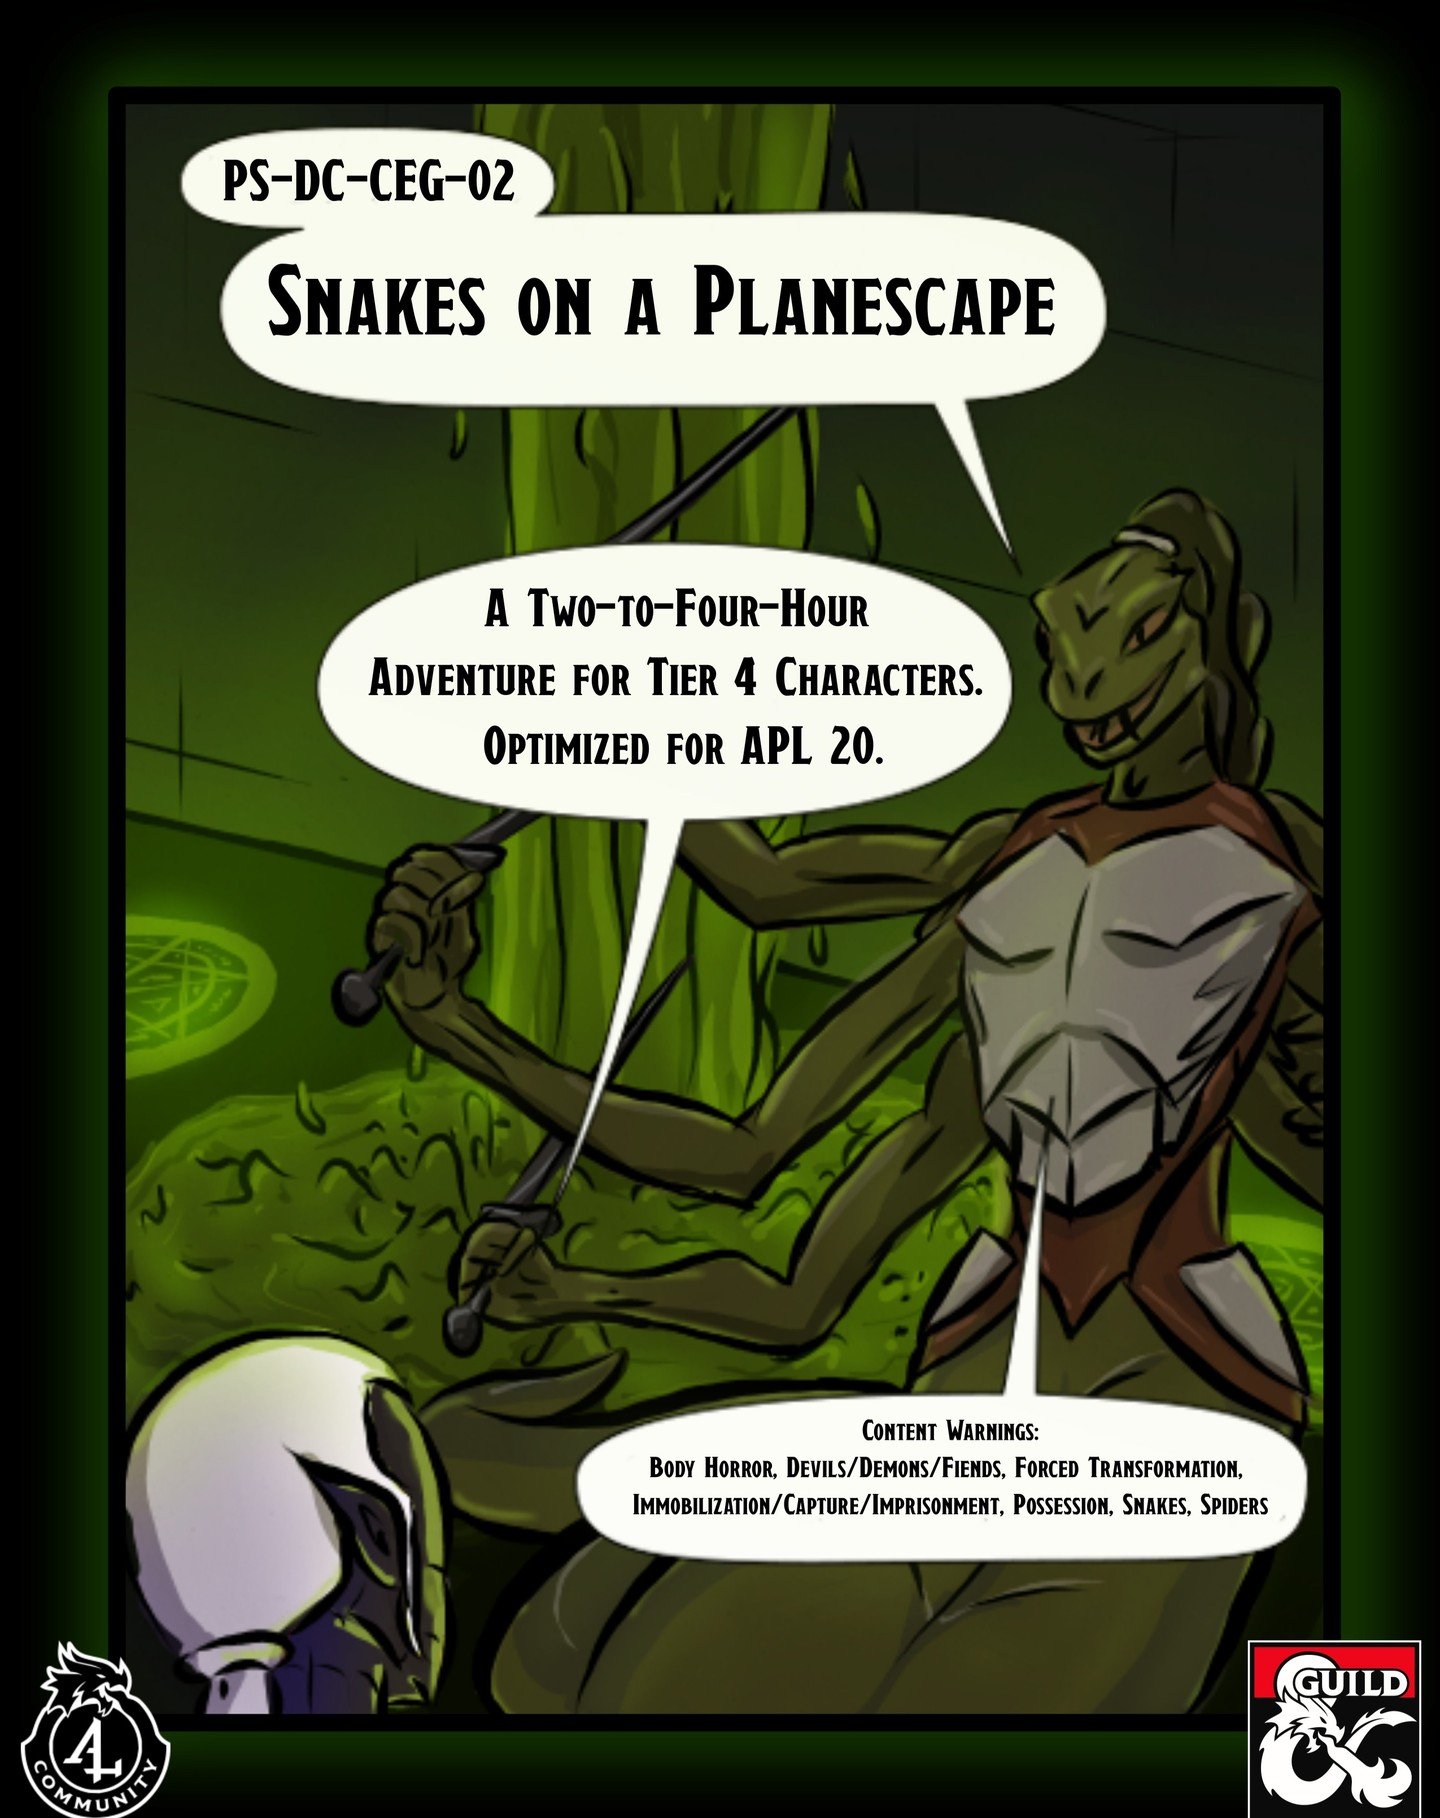 We've released our SECOND official Adventurers' League module! This time it's a snake-meme filled dungeon romp set in the city of Sigil. It's for tier 4/Level 20 characters and should take 2-4 hours to run. 
Get it now on DMs Guild!

#dnd #ttrpg #ind